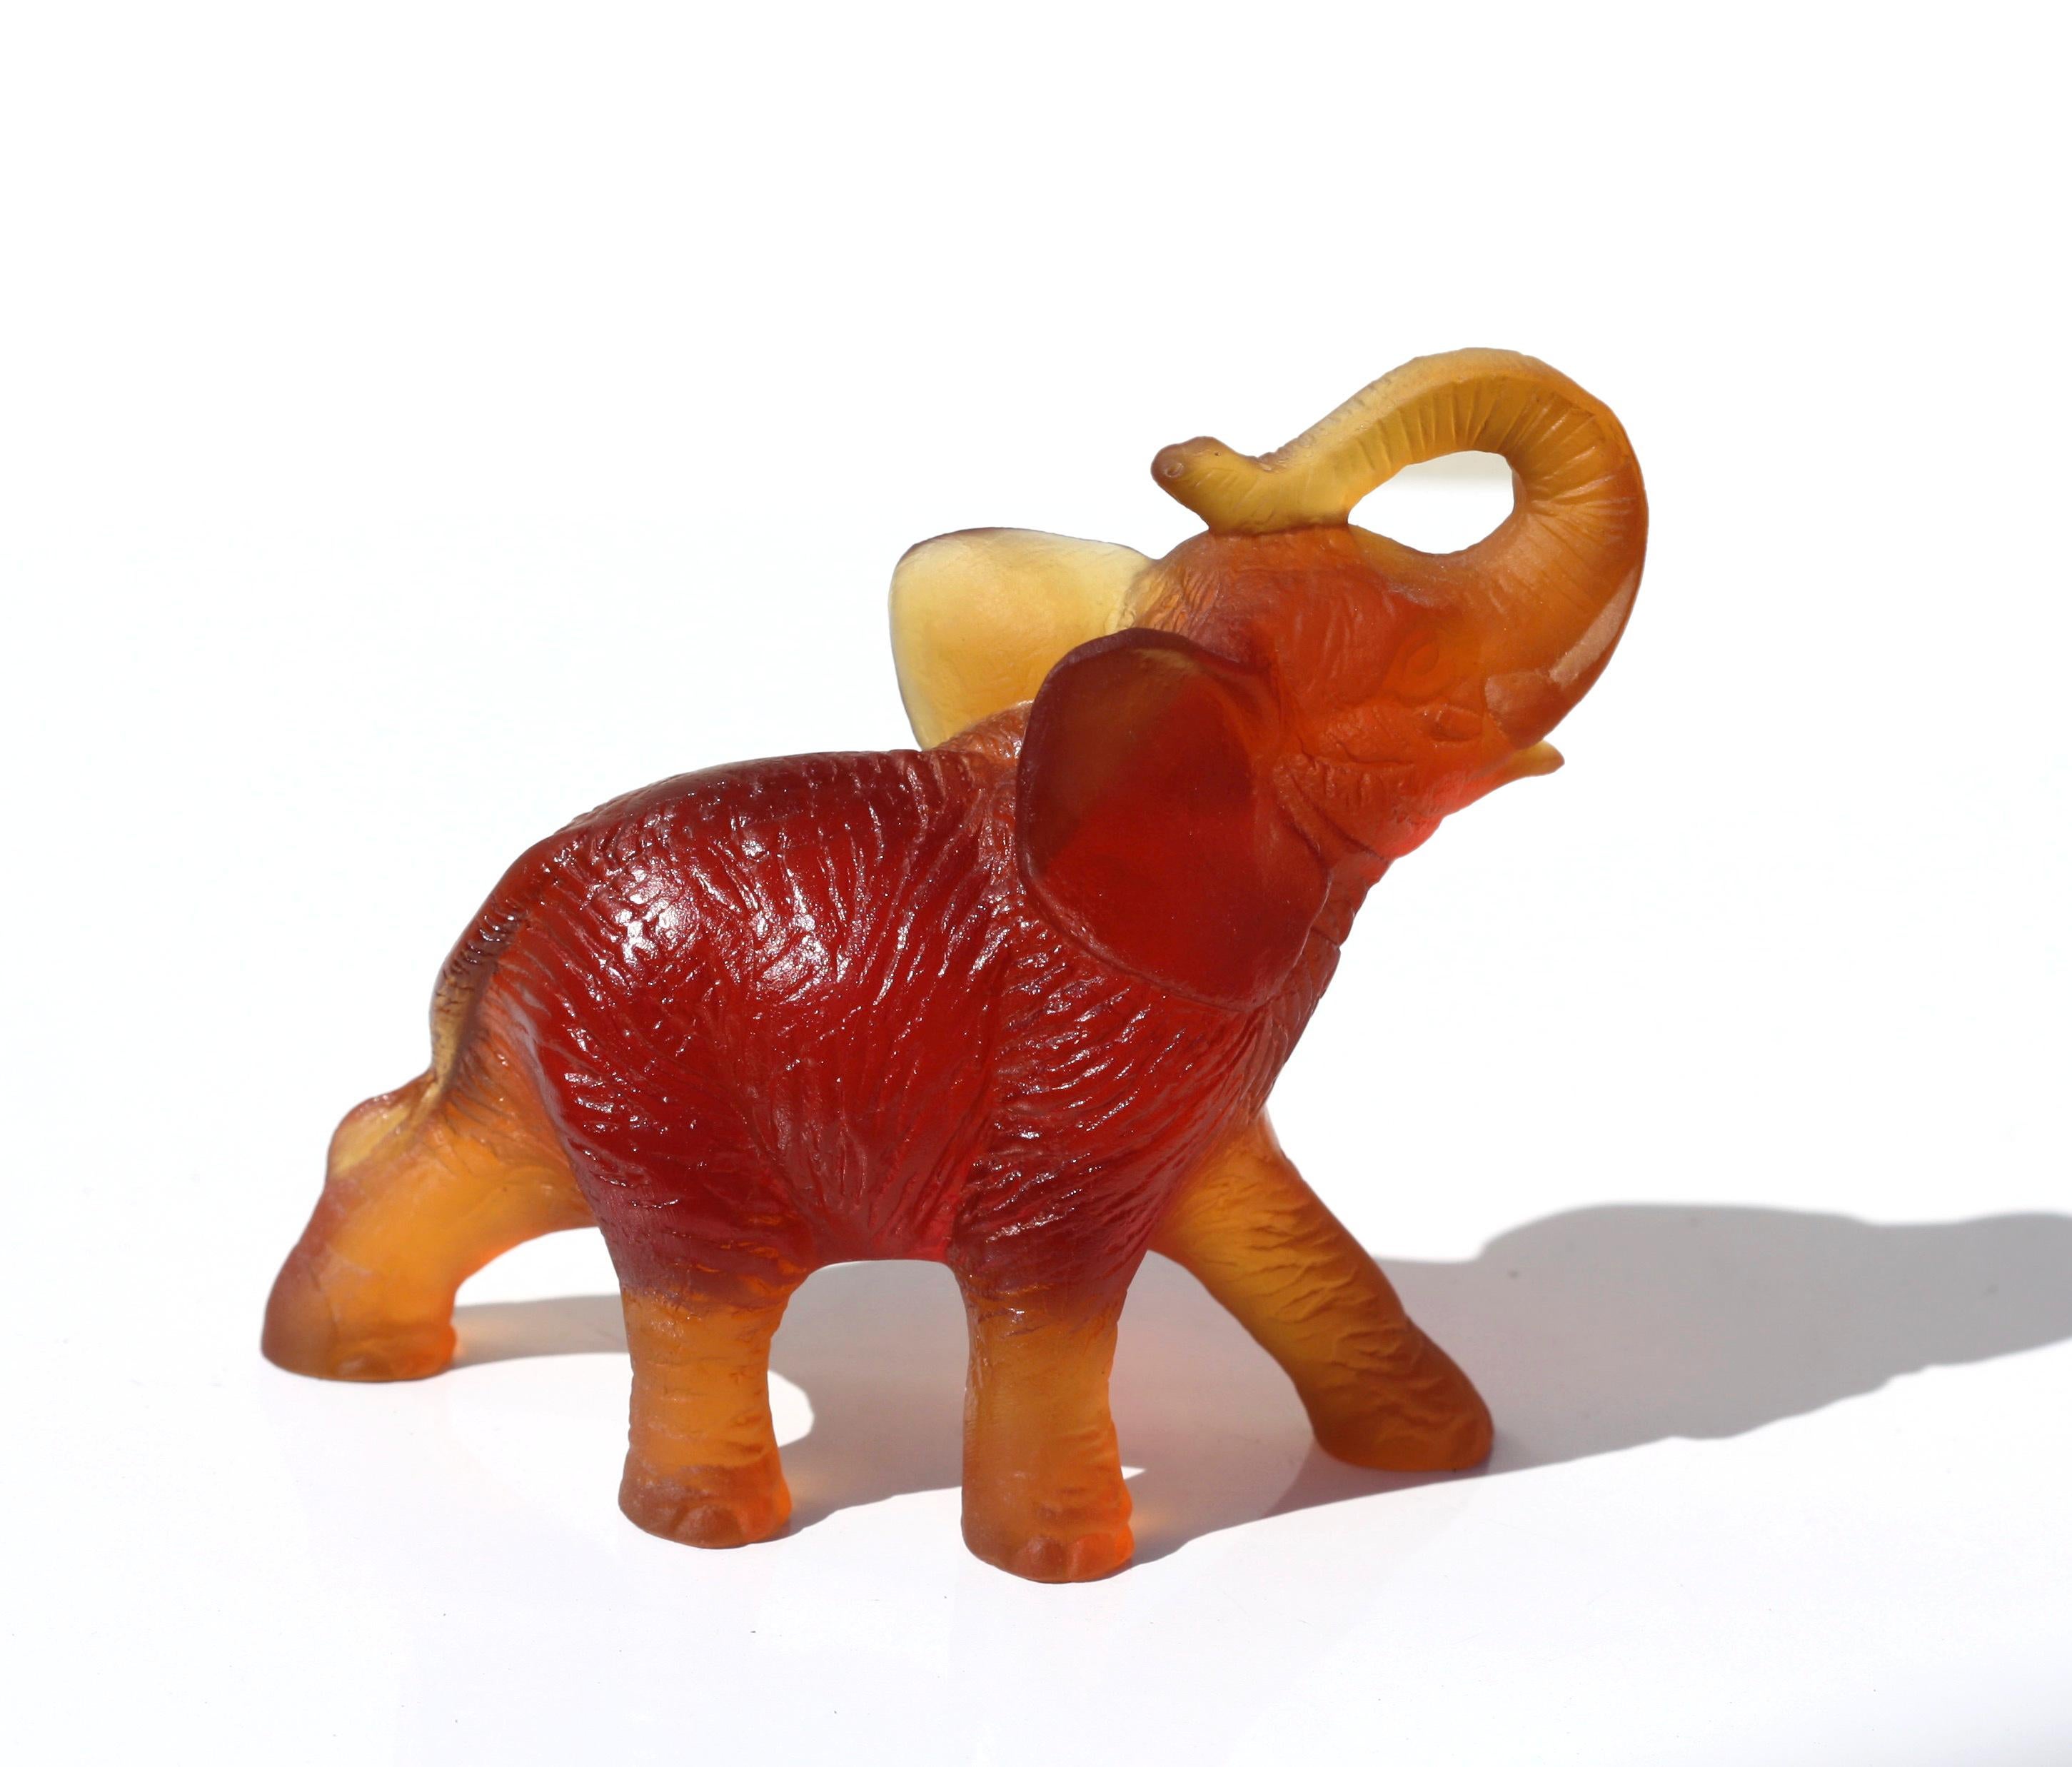 A Daum glass figure of an elephant
France, modern
in Amber Glass
engraved 'Daum France' 
signed Daum
Measures: 4 x 3 1 1/2 in.
 